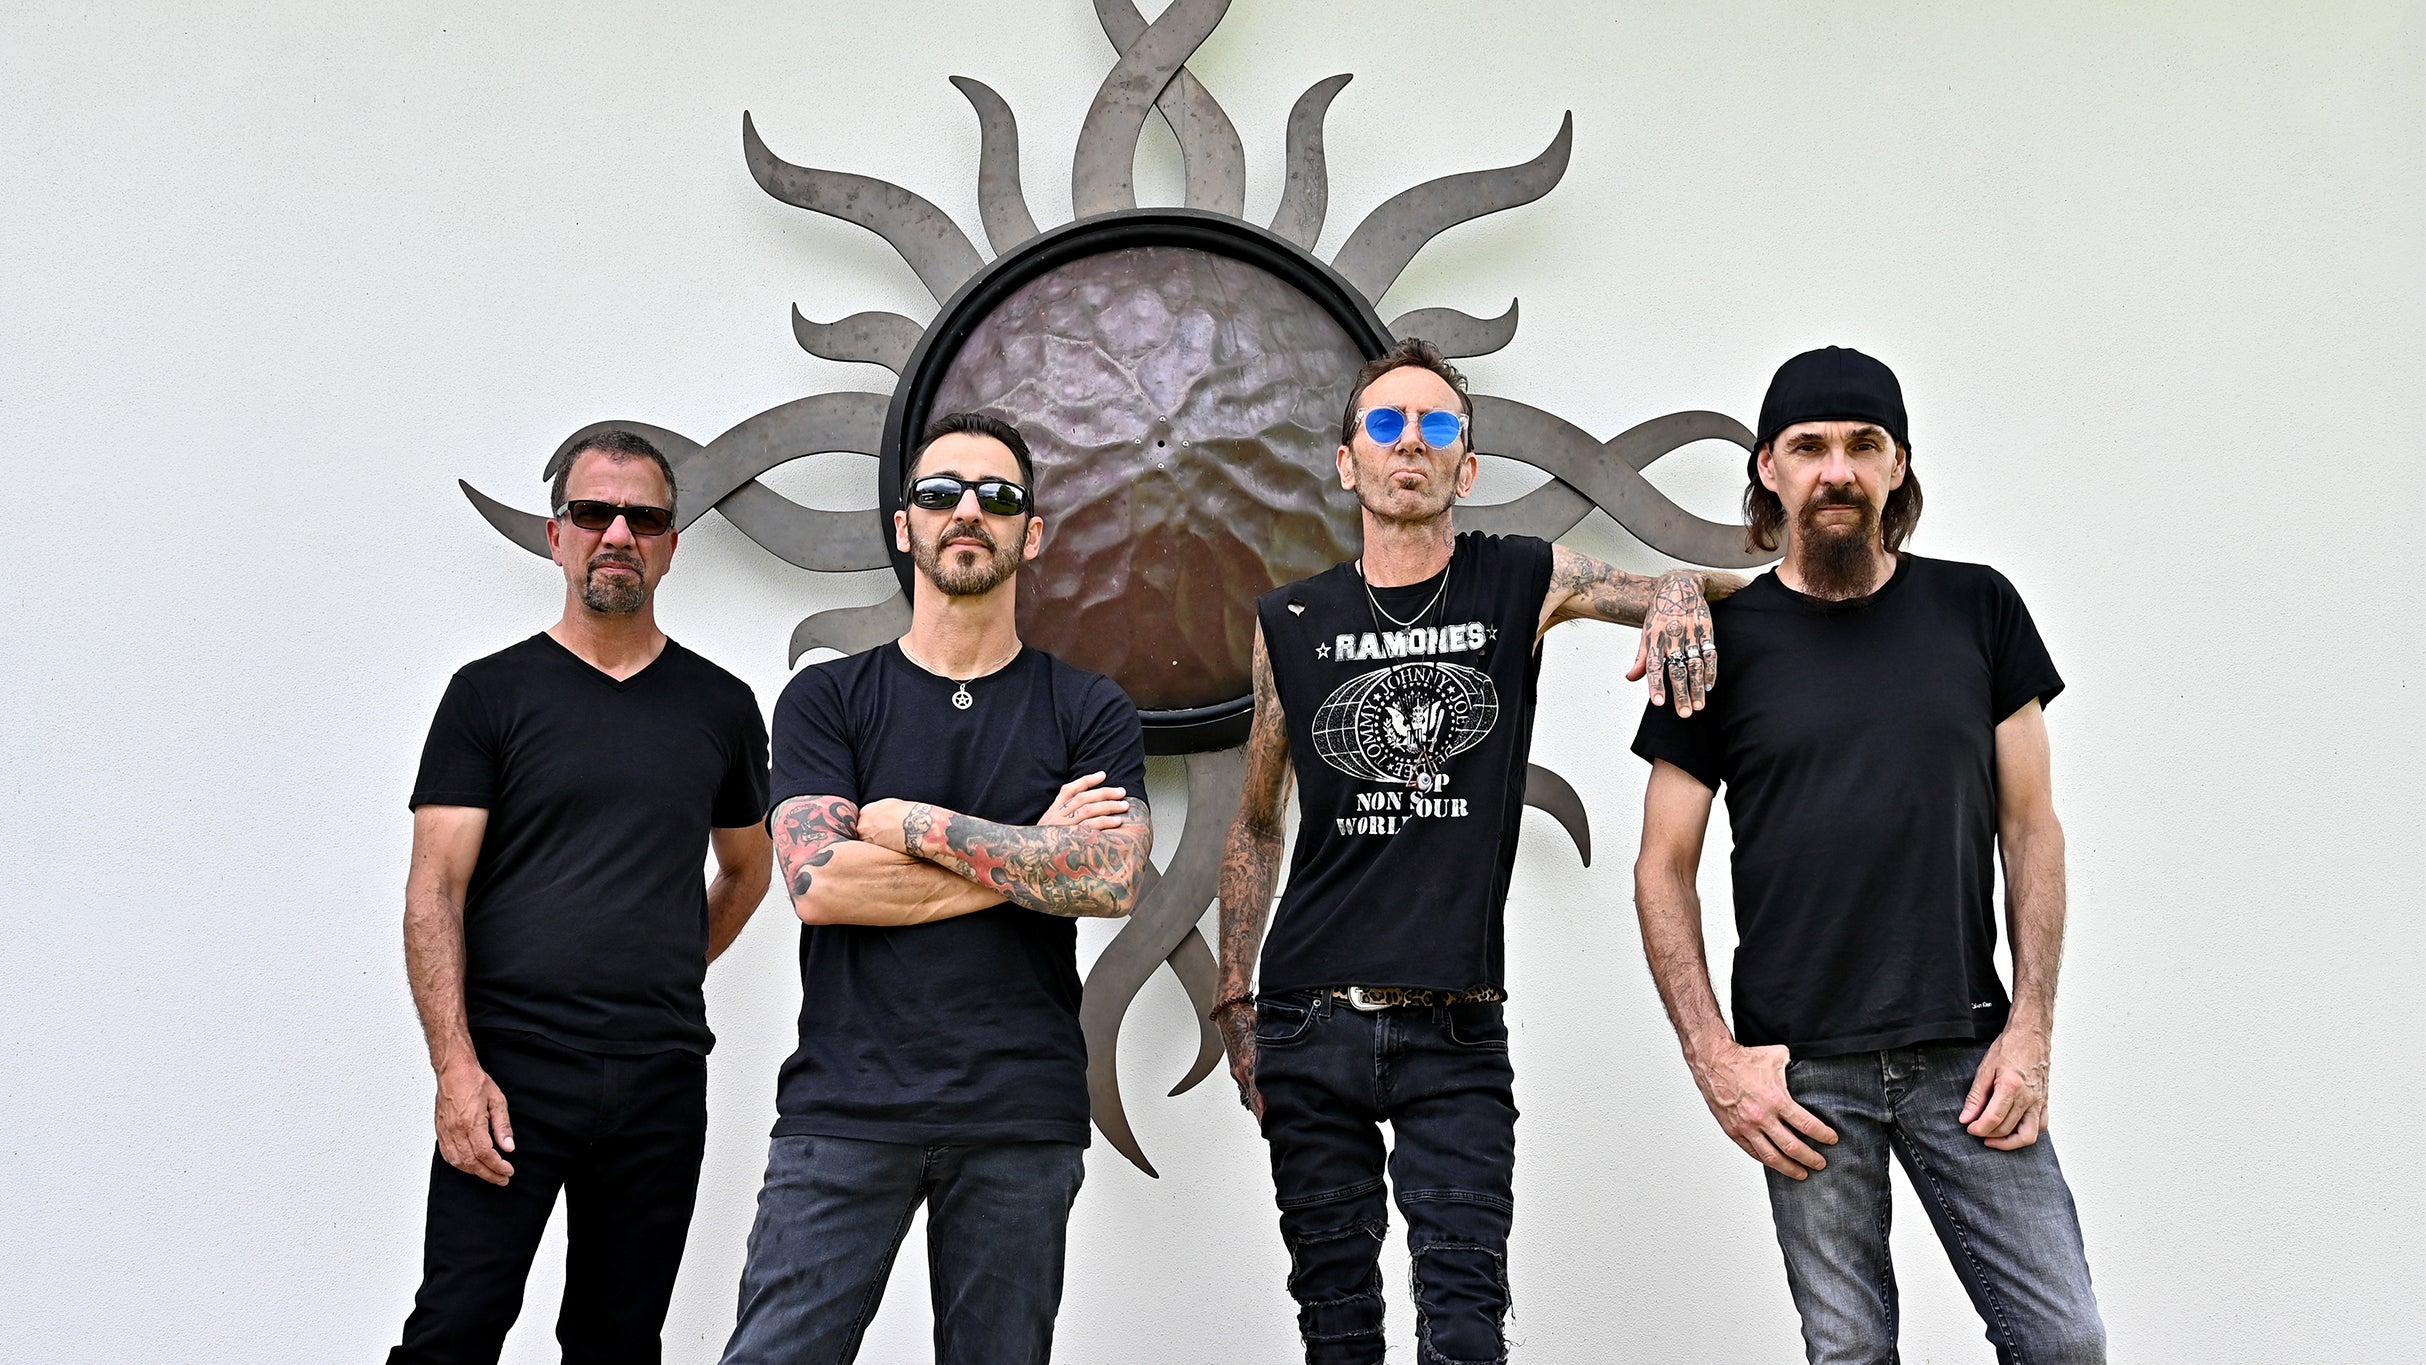 Vibez Tour - An Intimate Evening With Godsmack free presale password for early tickets in Durham